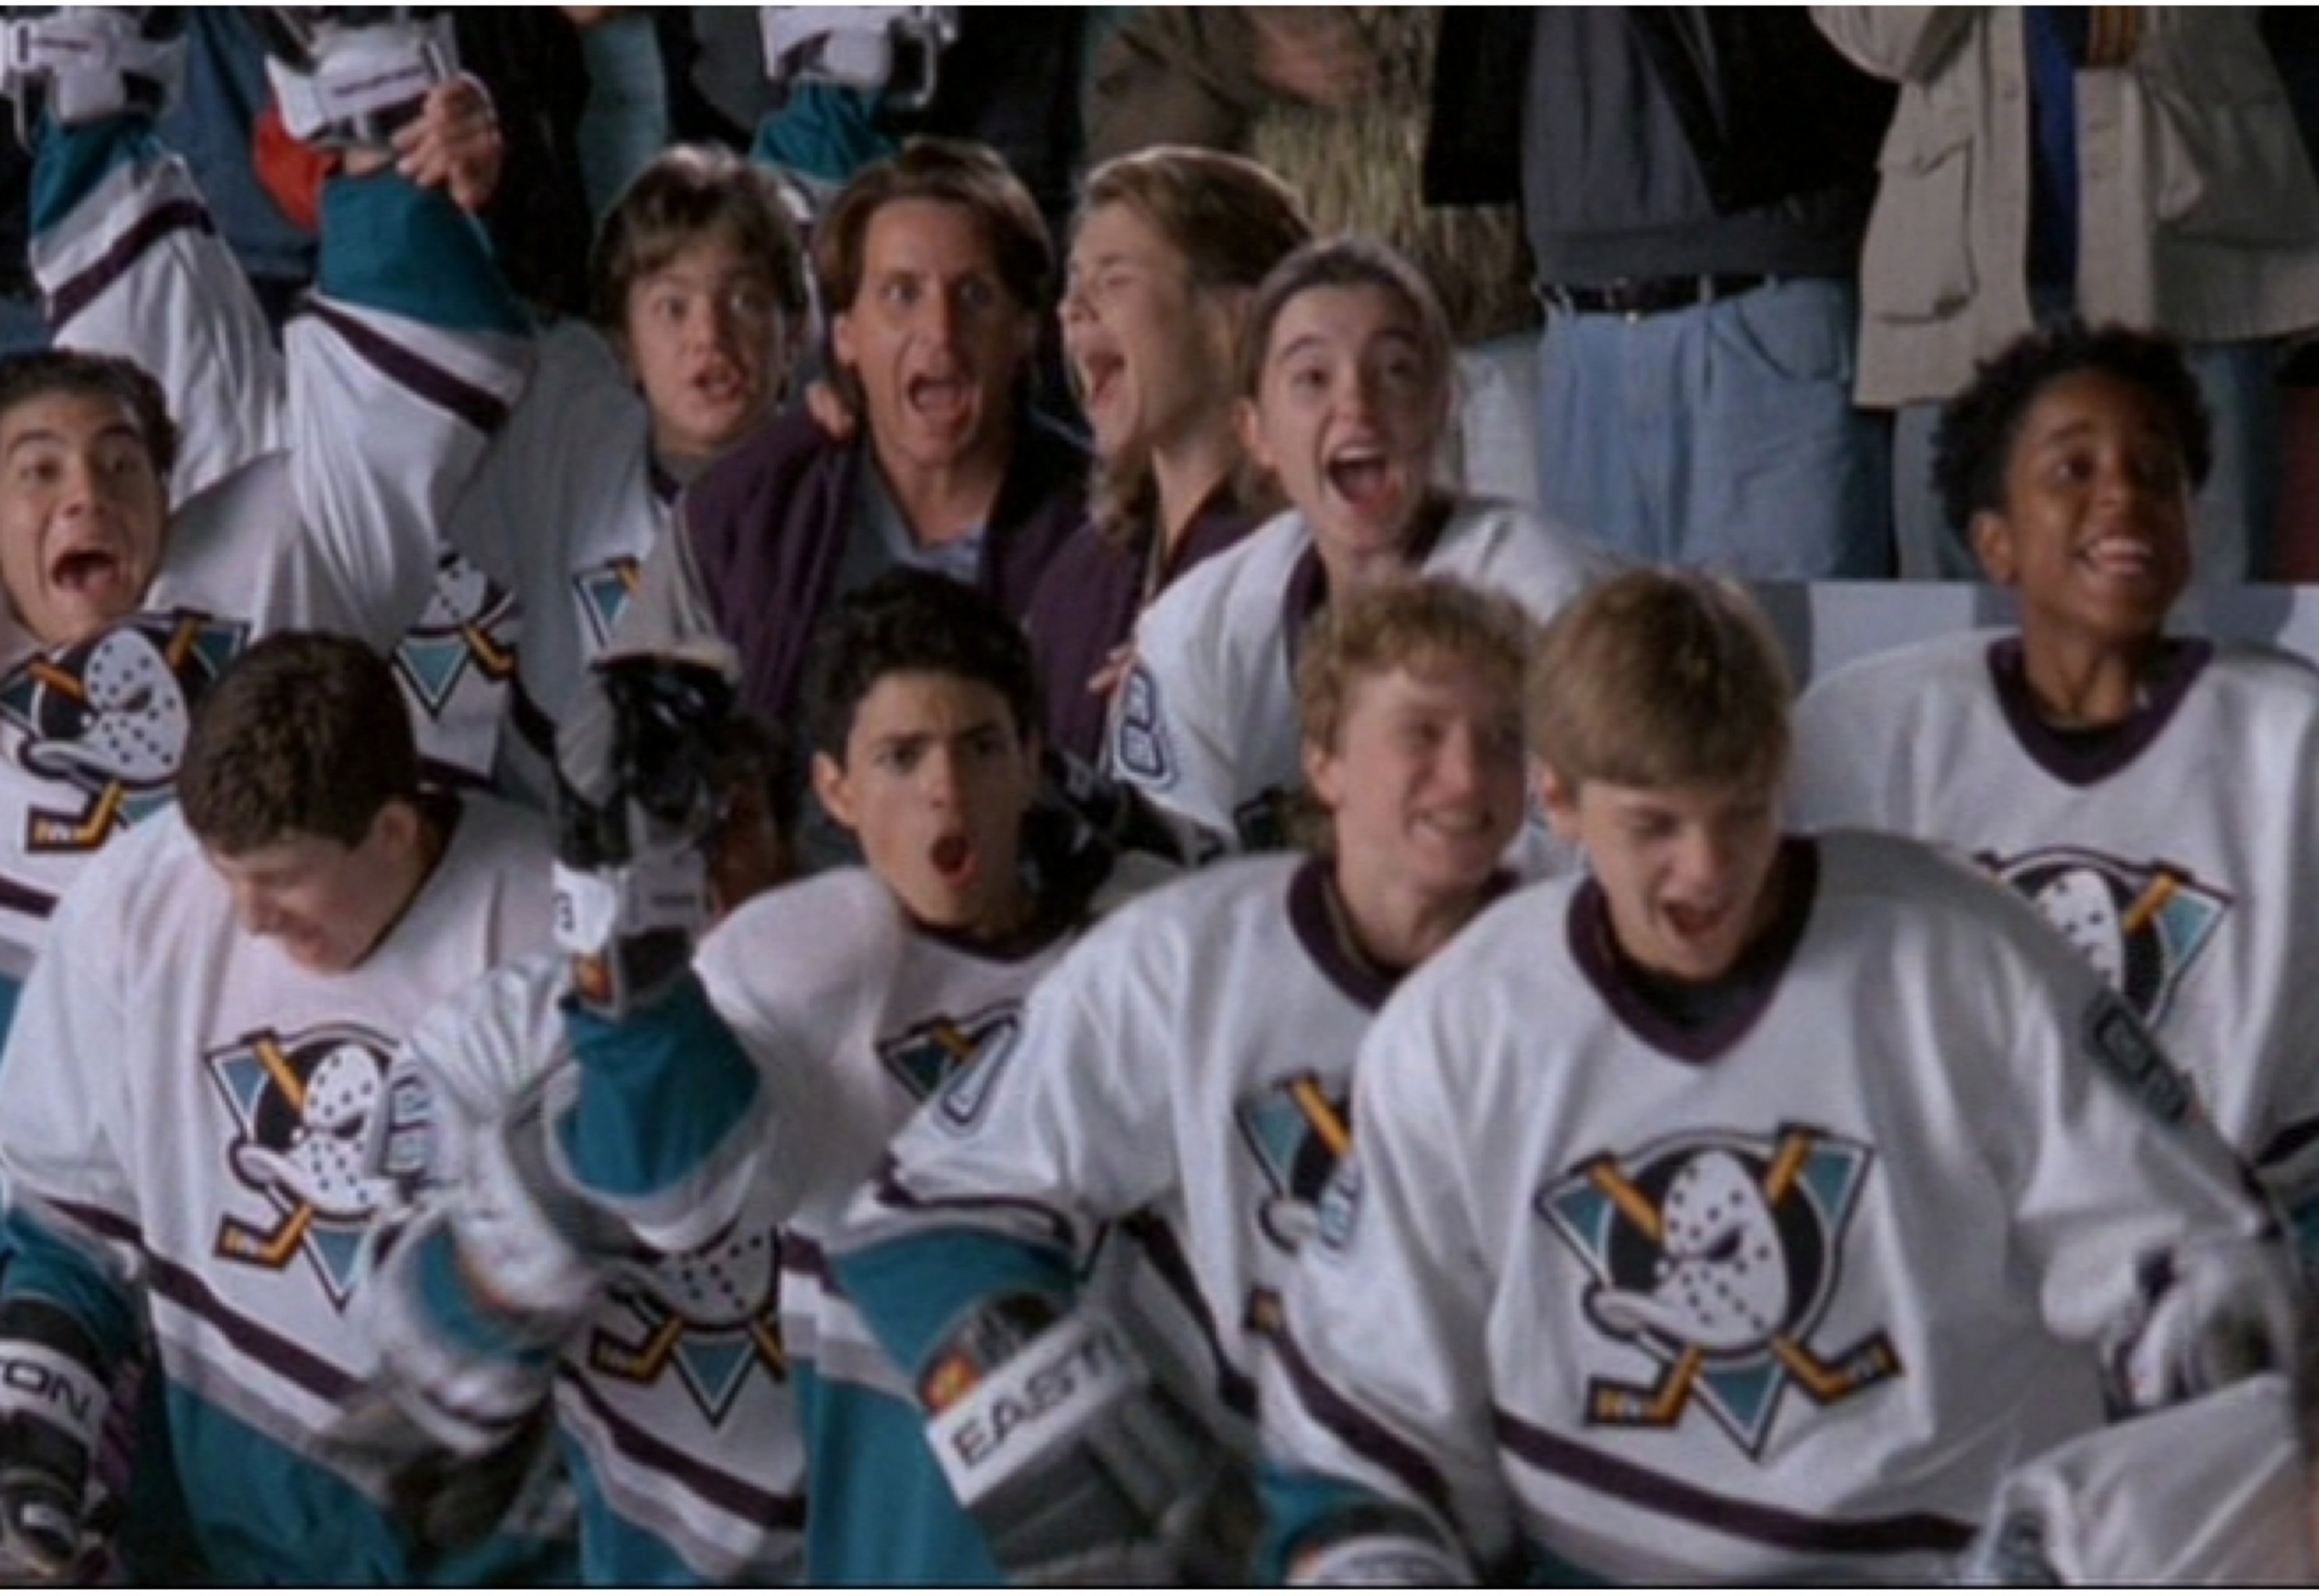 Mighty Ducks' coach Gordon Bombay was awful at his job, and it's time we  all admit it